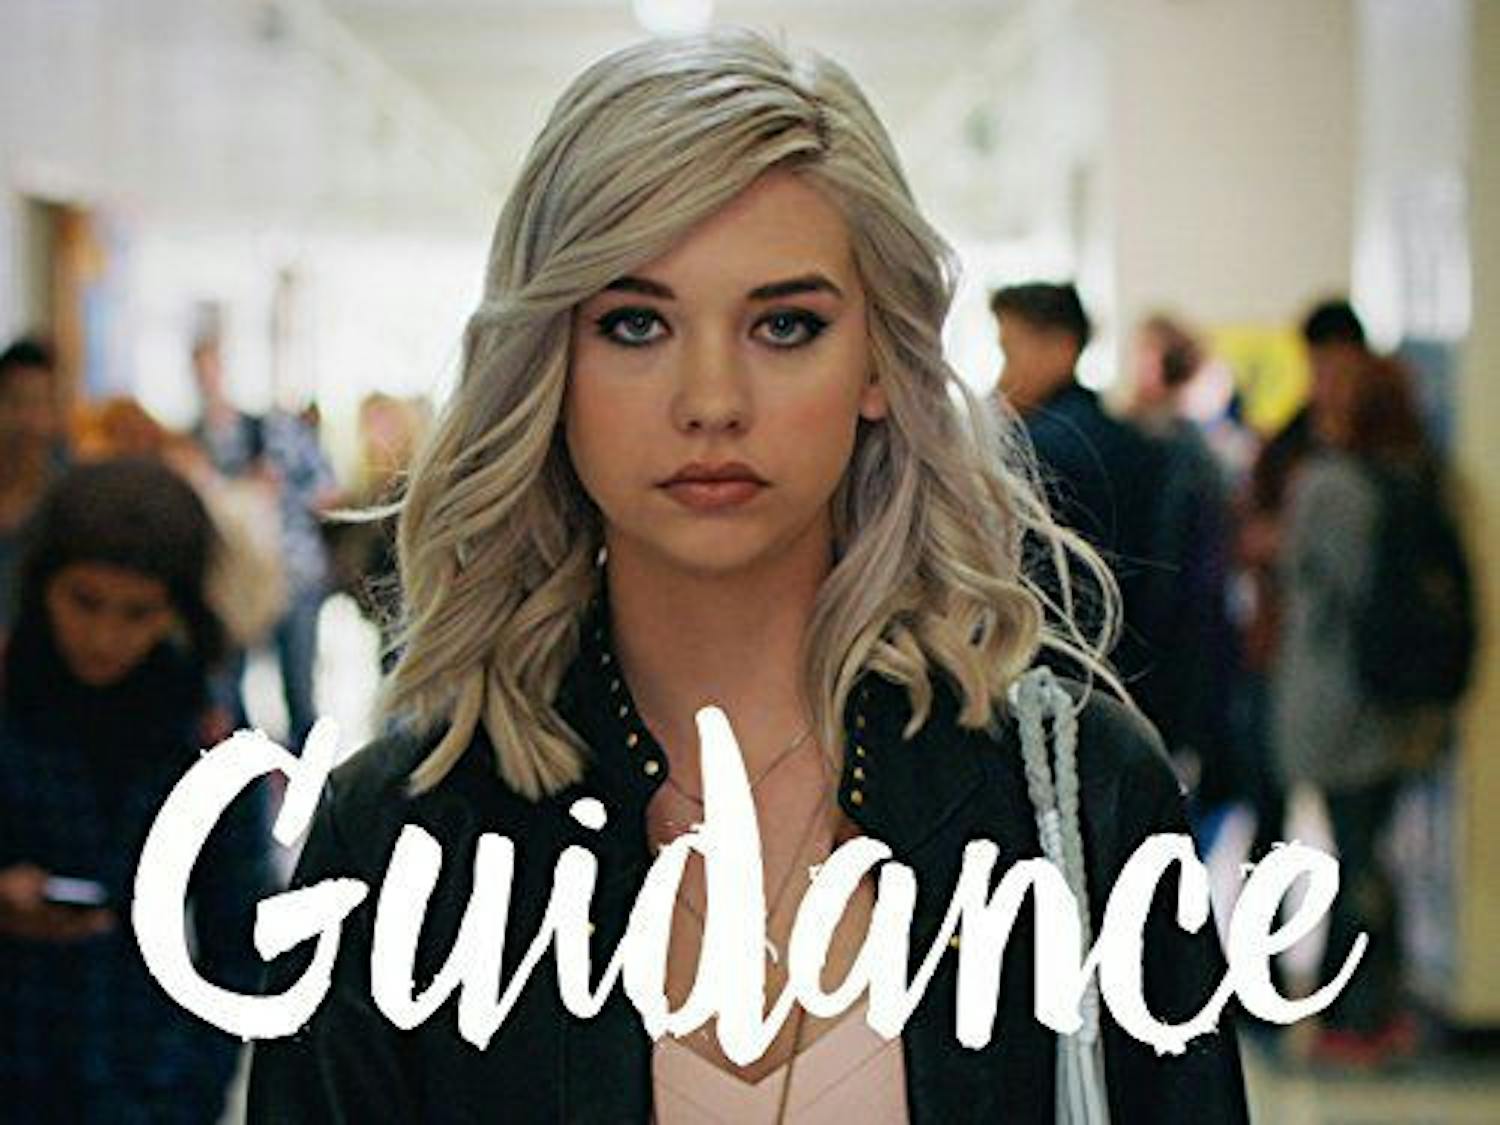 Guidance is executive produced by fMichelle Tractenberg. She also starred as the original guidance counselor in the first season.